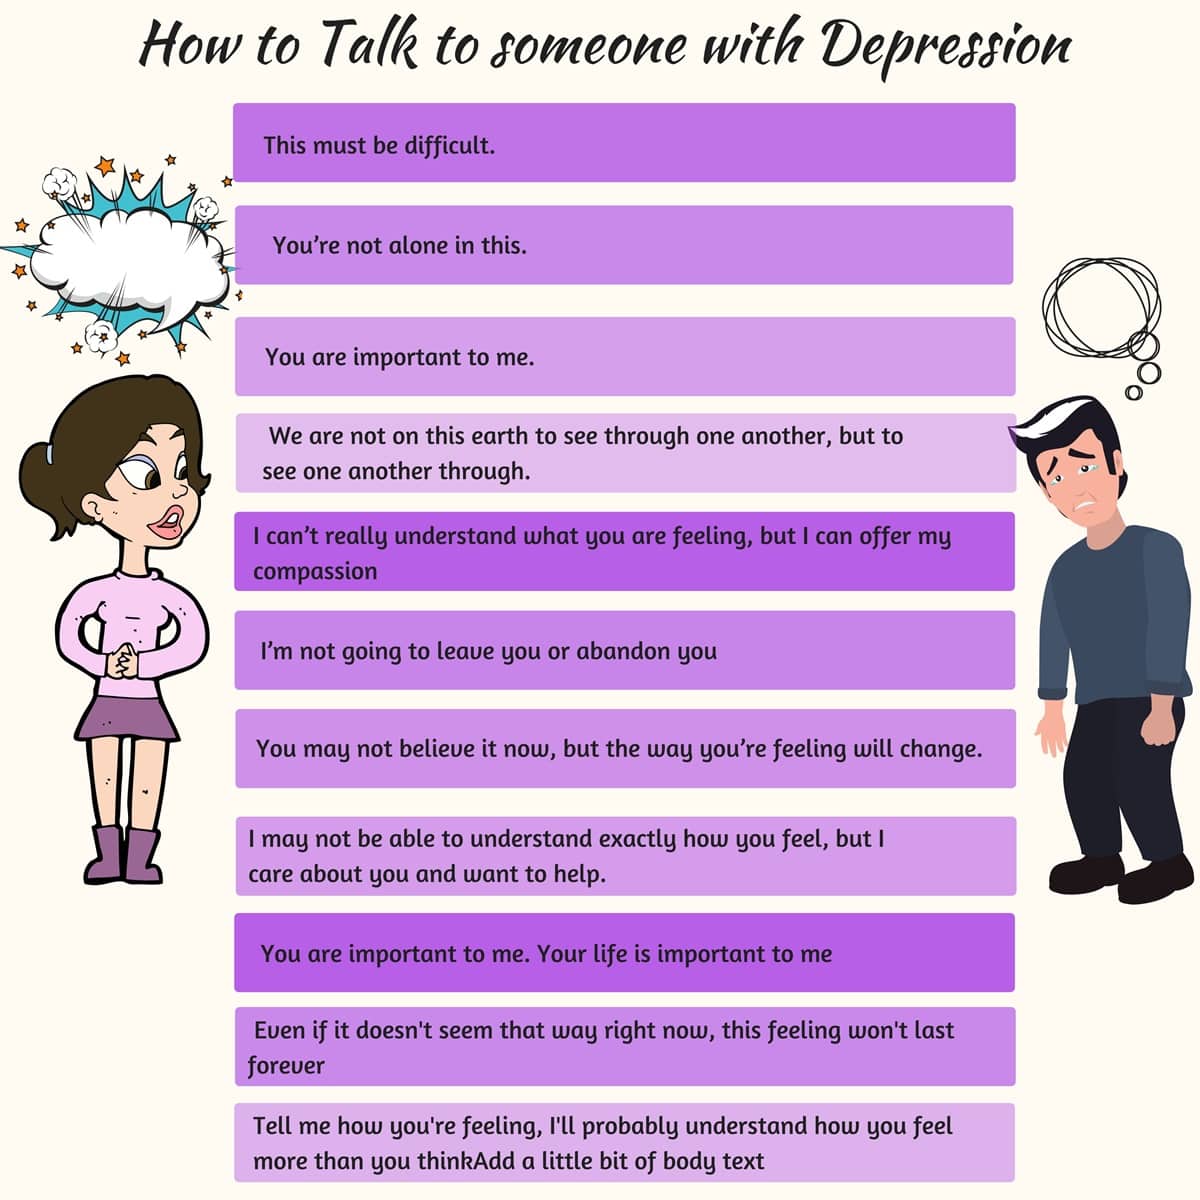 53 Useful Things to Say to Someone with Depression in English